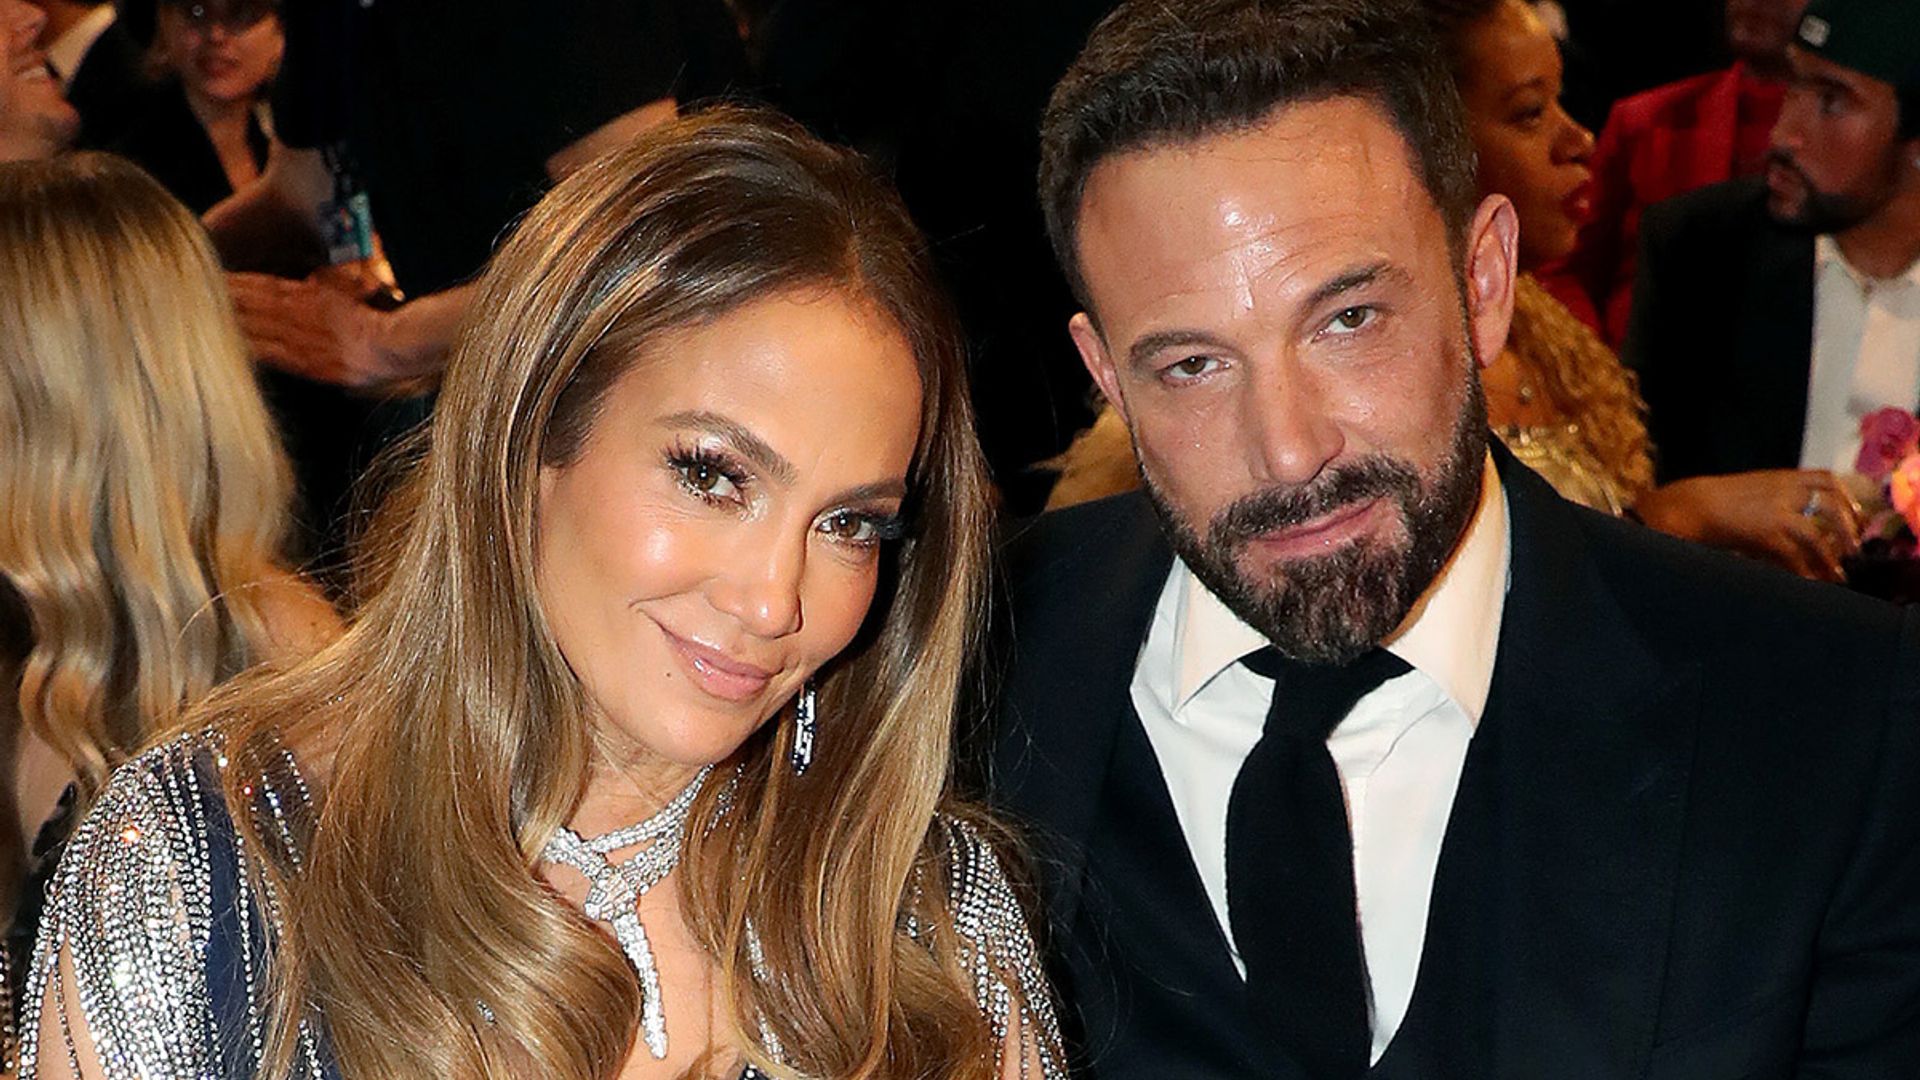 Jennifer Lopez exposes decorated chest and endless legs for Grammys debut with Ben Affleck